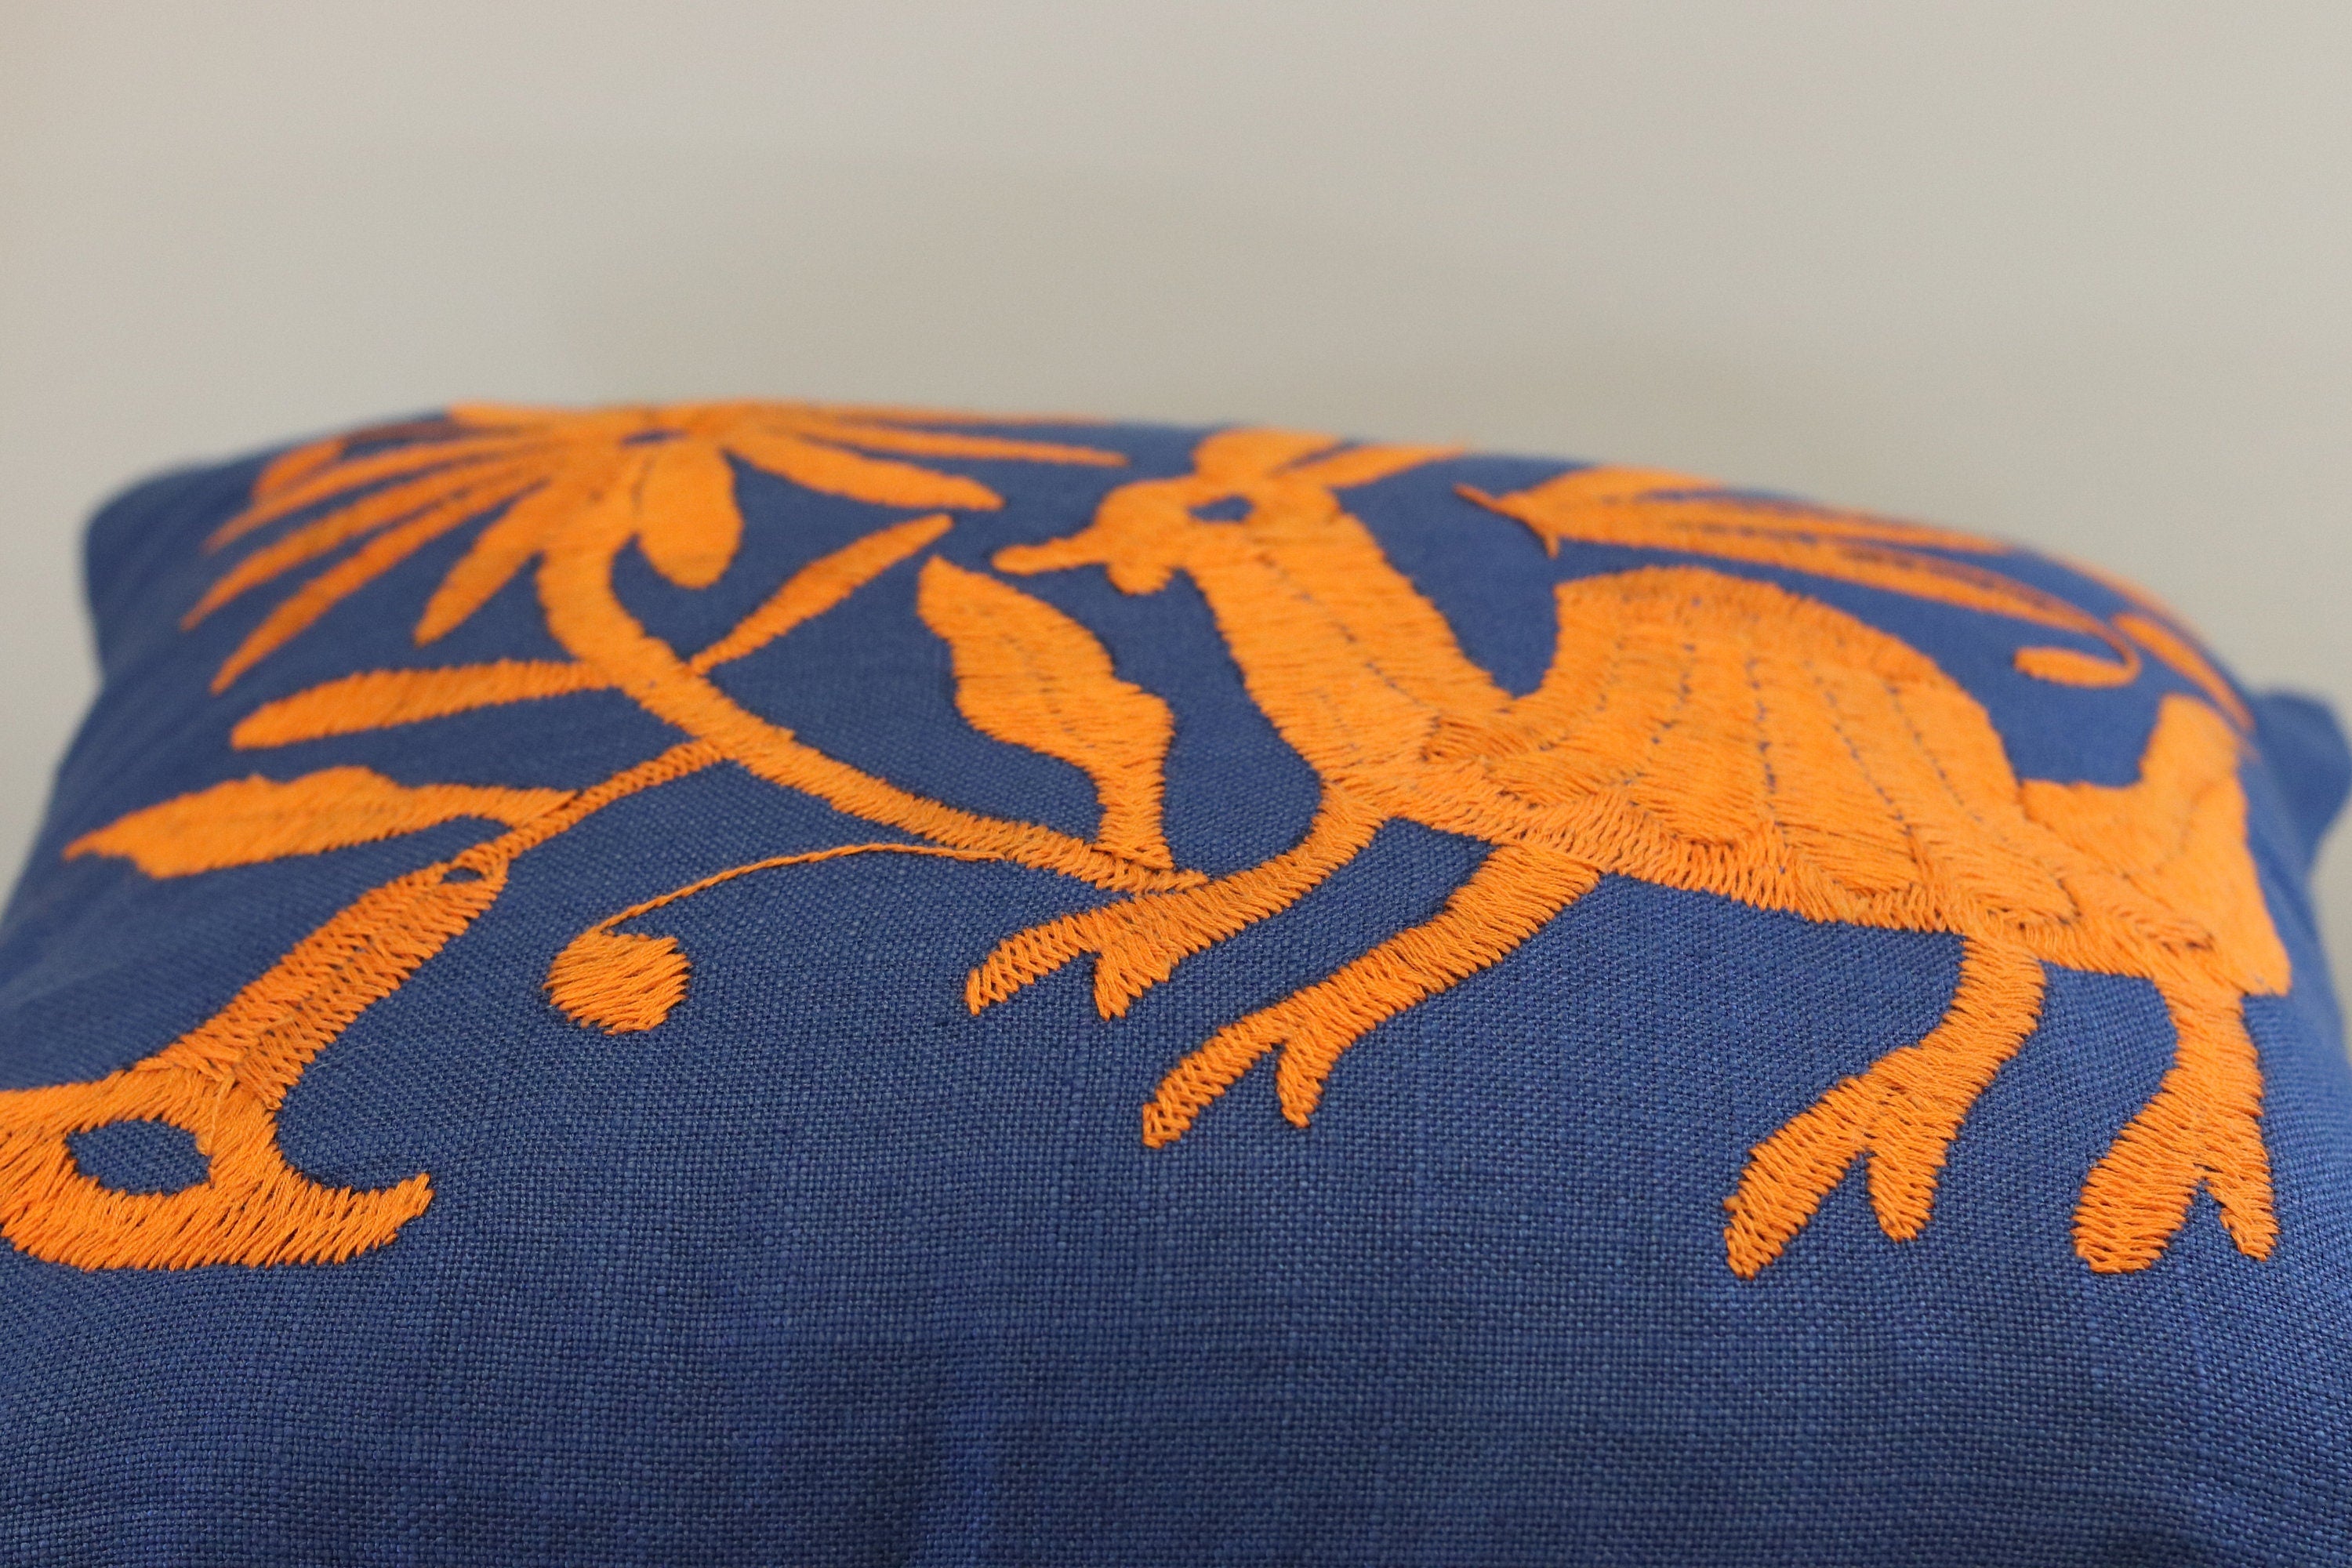 Blue and Orange Square Otomi Tenango Pillow Cover with Hand Embroidered Birds, Flowers, and Animals in Vibrant Colors. Handmade in Mexico. Ships from the USA. Buy now at www.felipeandgrace.com.